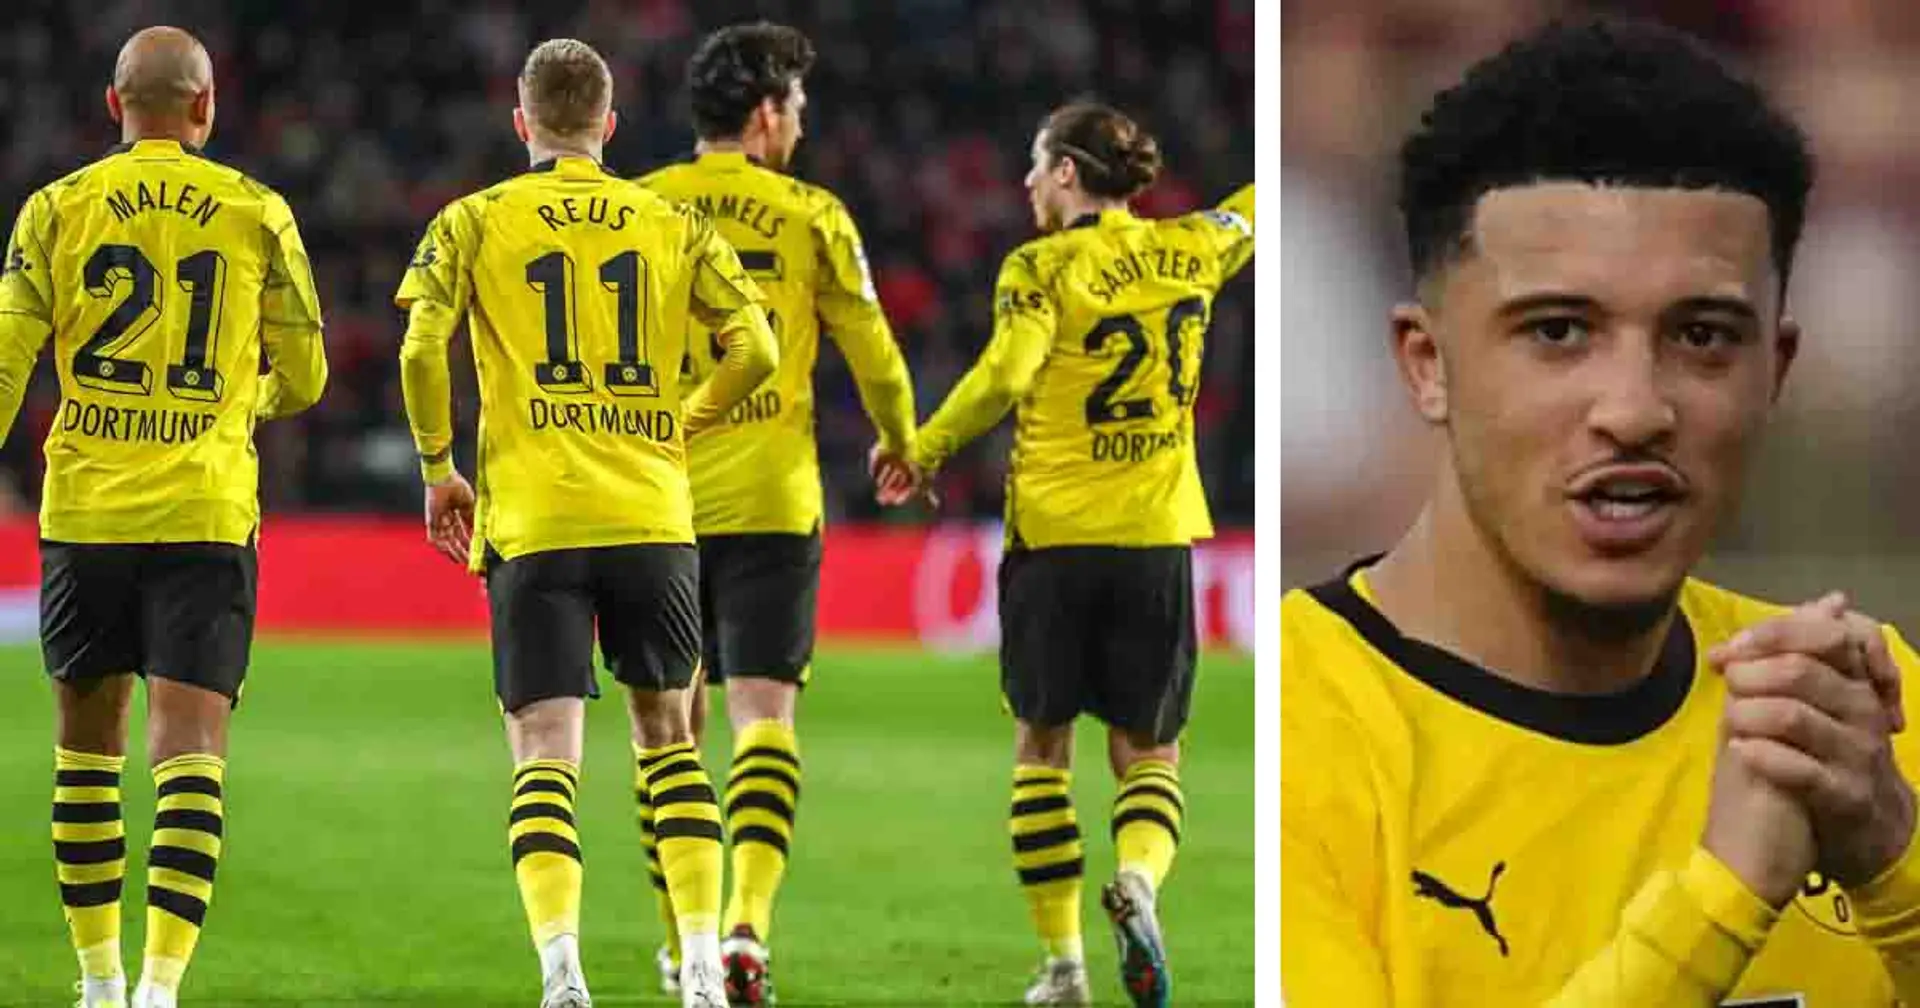 Borussia Dortmund ready to accept ambitious swap deal to permanently sign Sancho (reliability 4 stars)